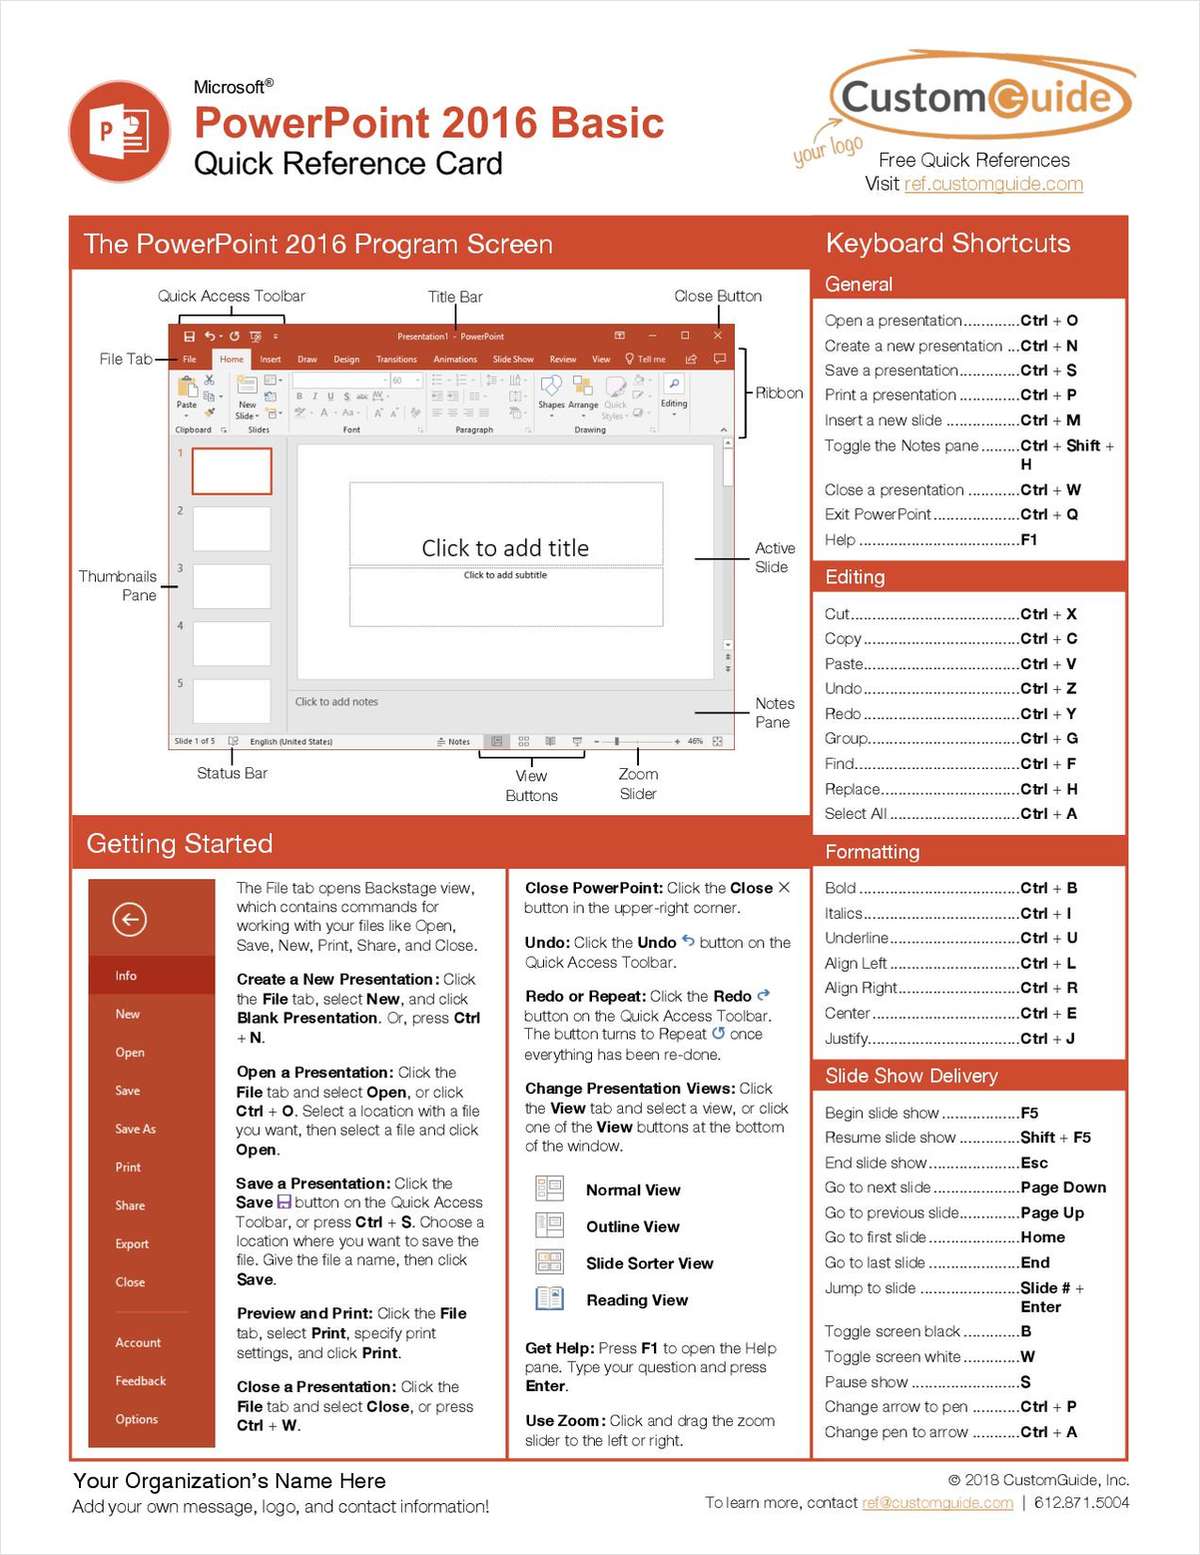 Microsoft PowerPoint 2016 Basic - Quick Reference Card